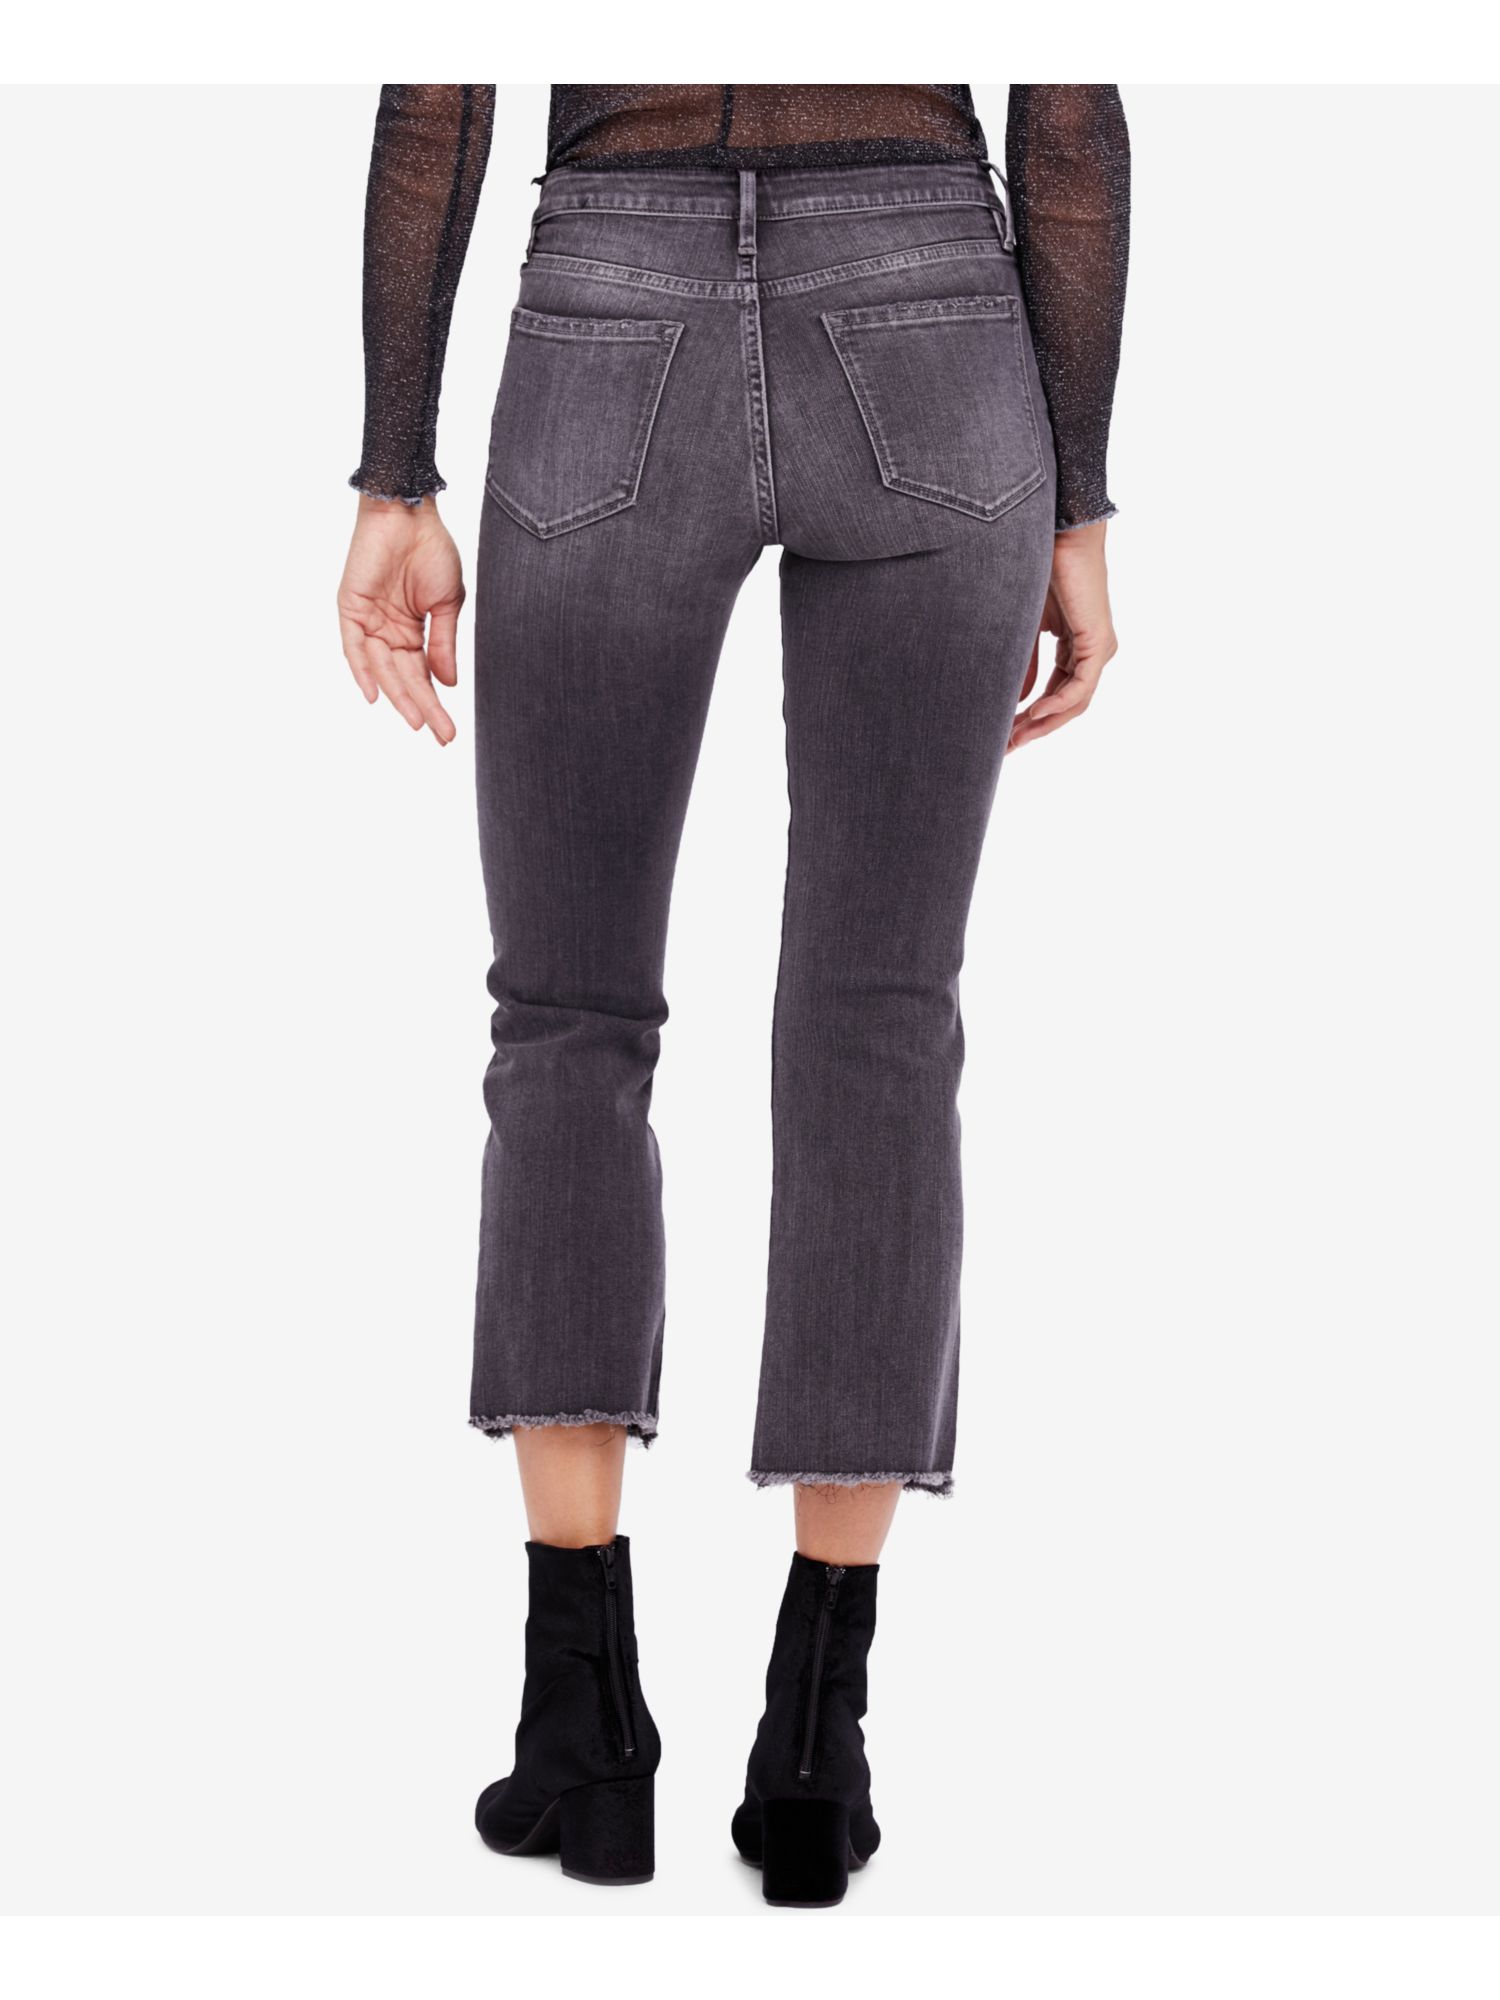 FREE PEOPLE $78 Womens 1052 Black Zippered Pocketed Frayed Skinny Jeans 24 WAIST - image 2 of 4